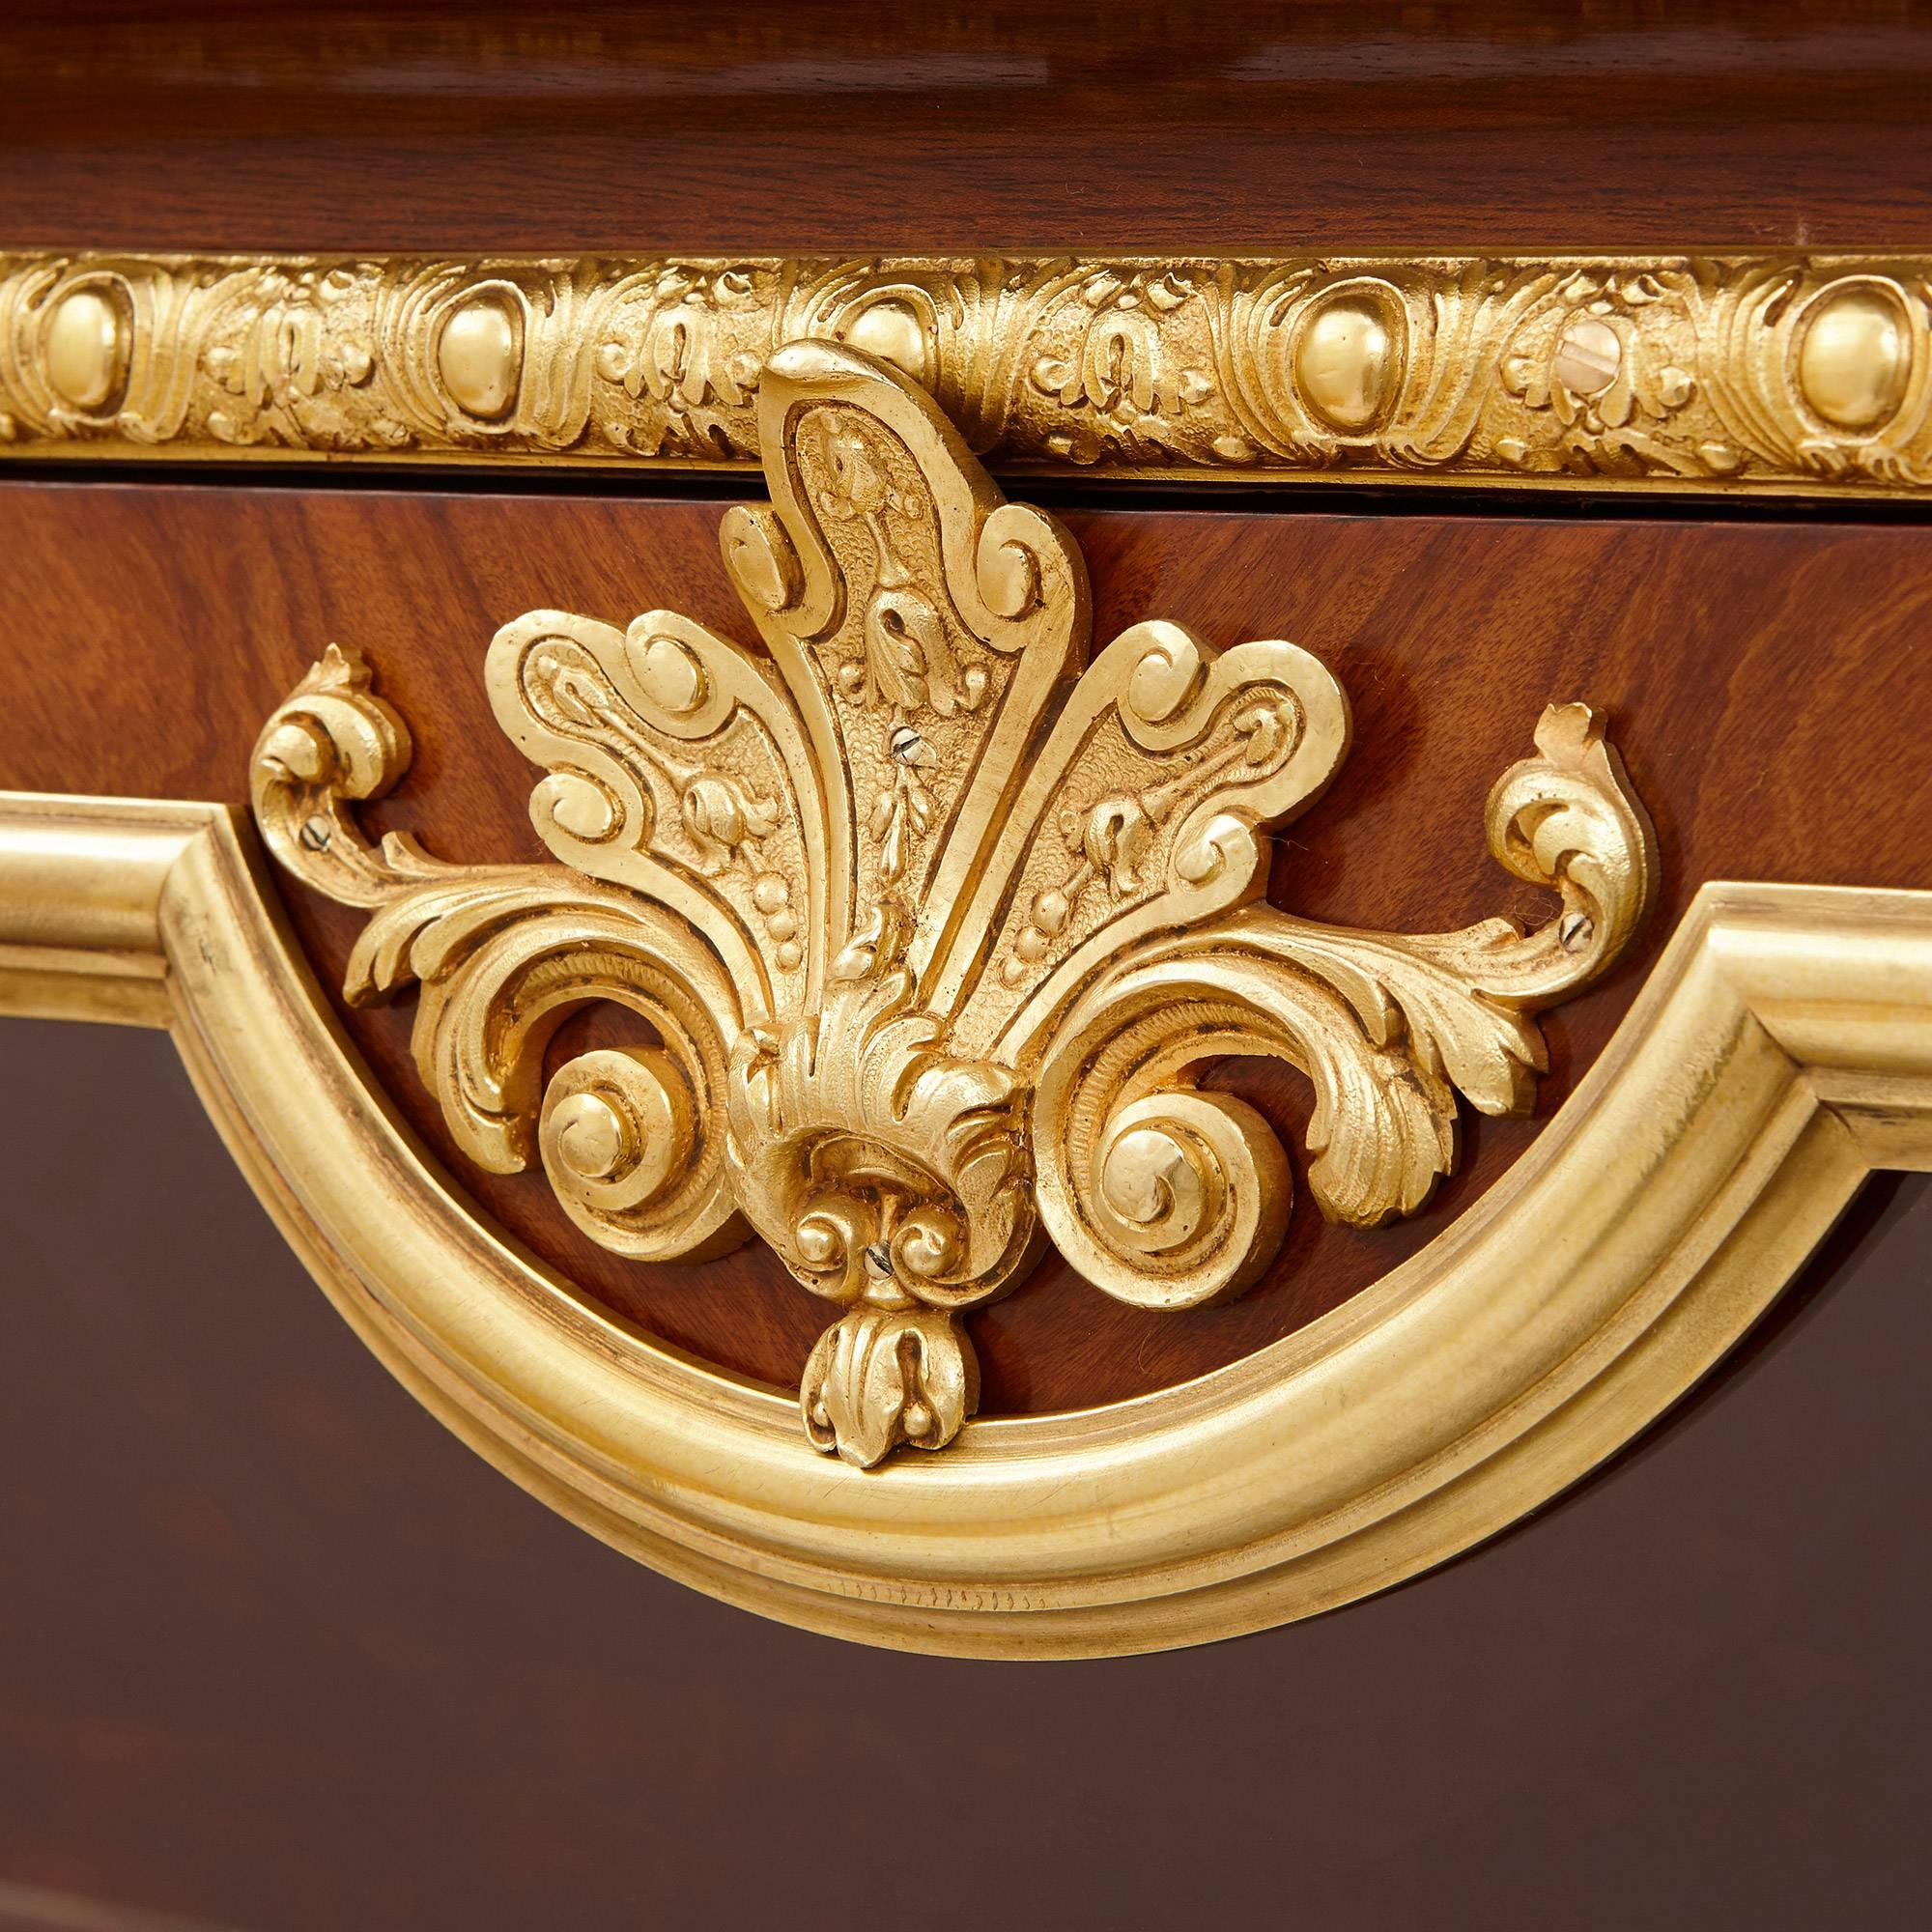 Gilt French Ormolu-Mounted Mahogany, Kingwood, Marquetry and Parquetry Vitrine